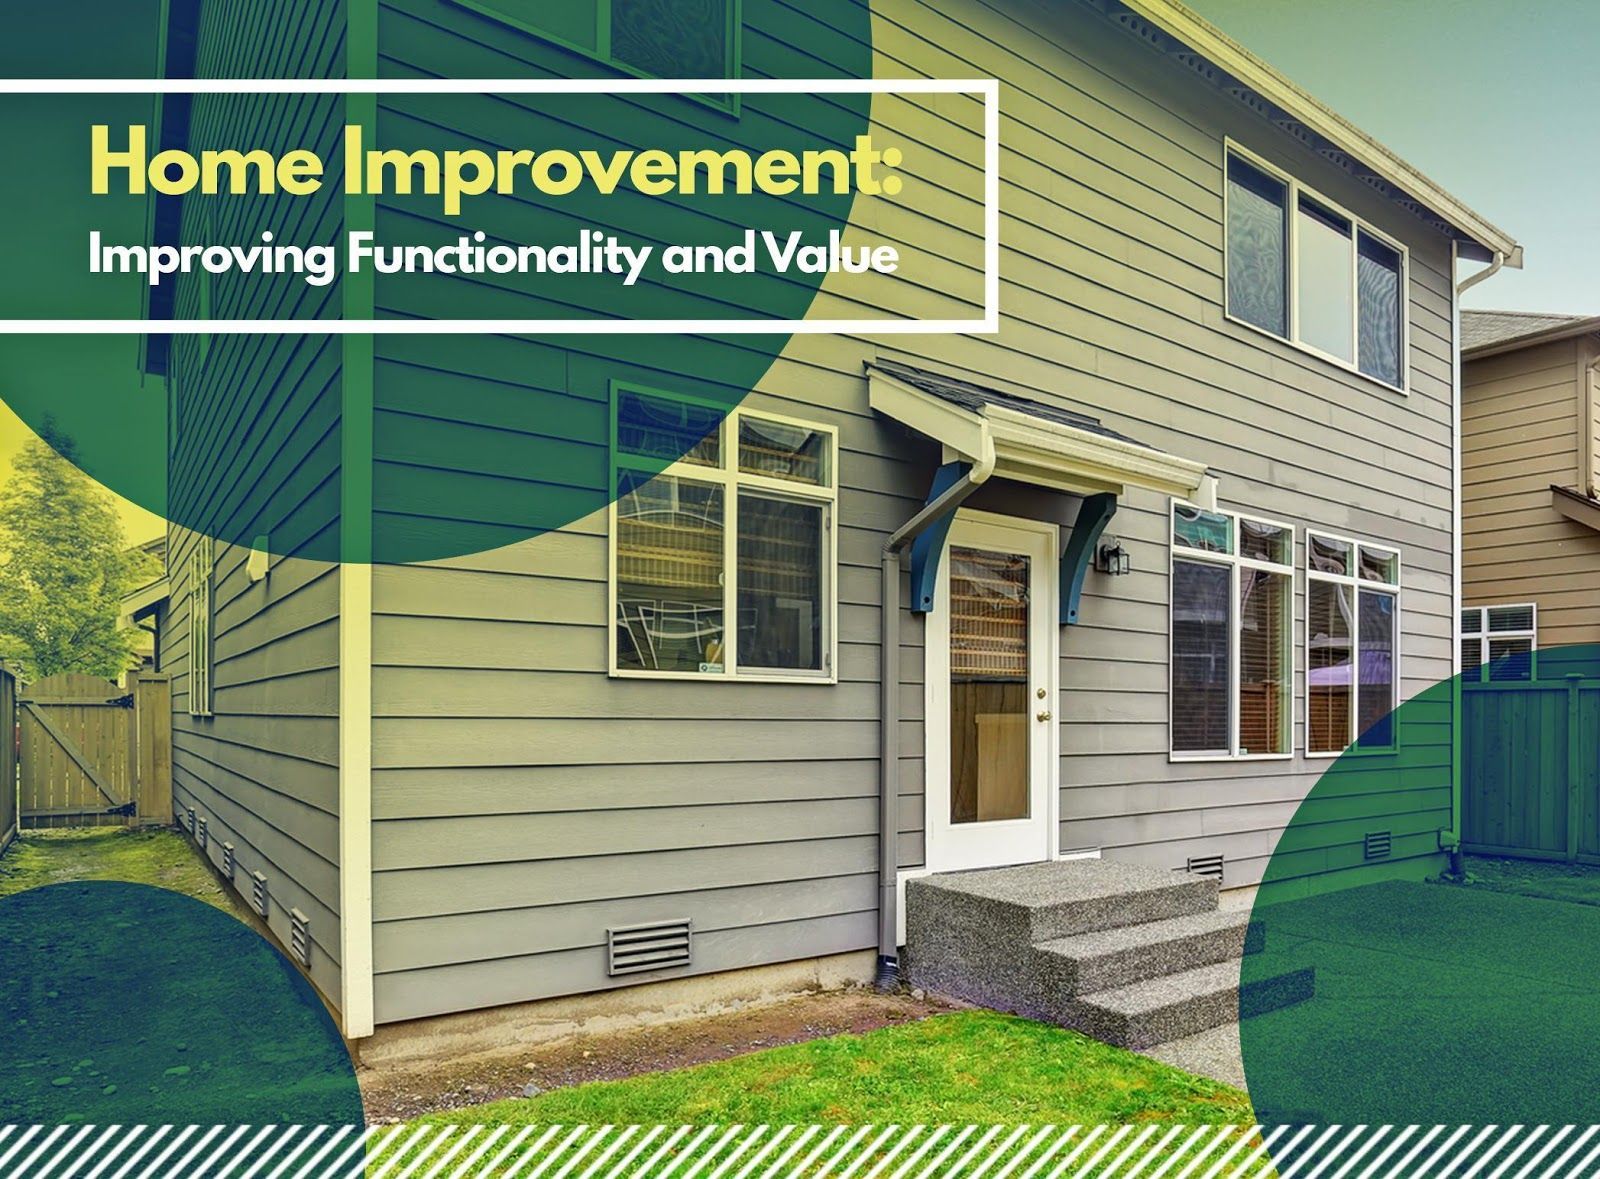 Home Improvement: Improving Functionality and Value